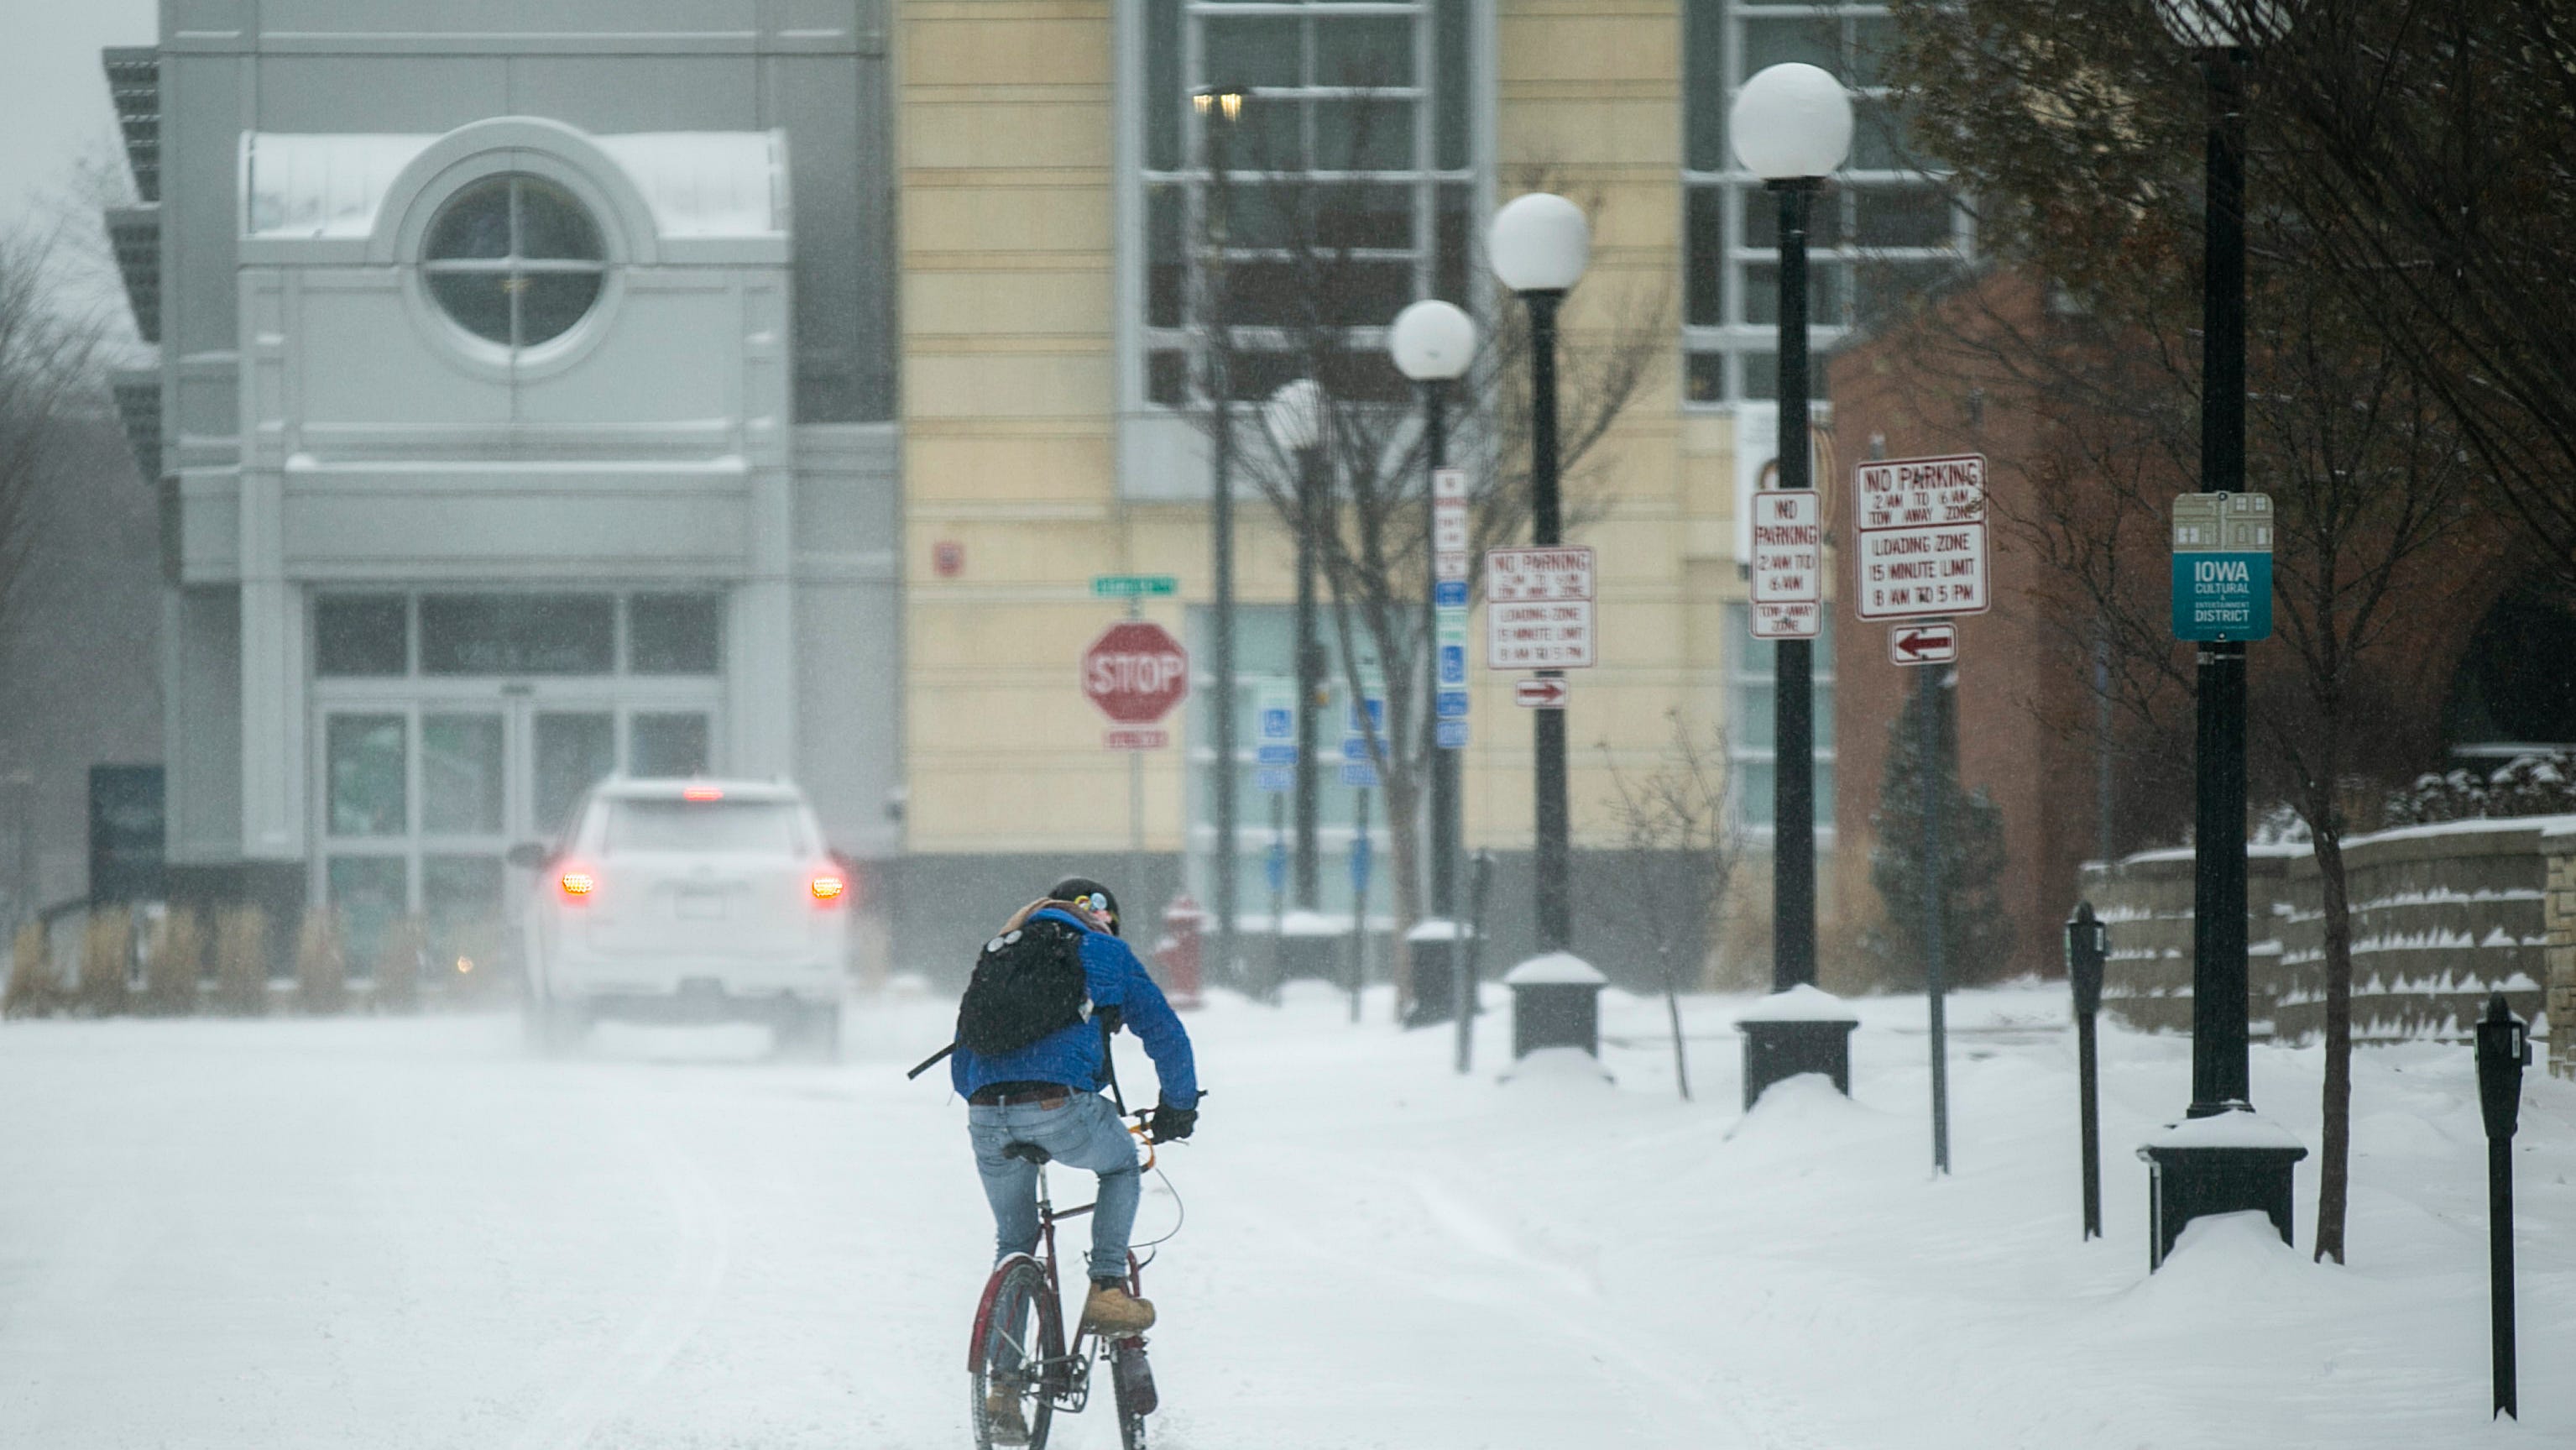 Iowa winter storm hits Wednesday. Here are forecasts, what to expect